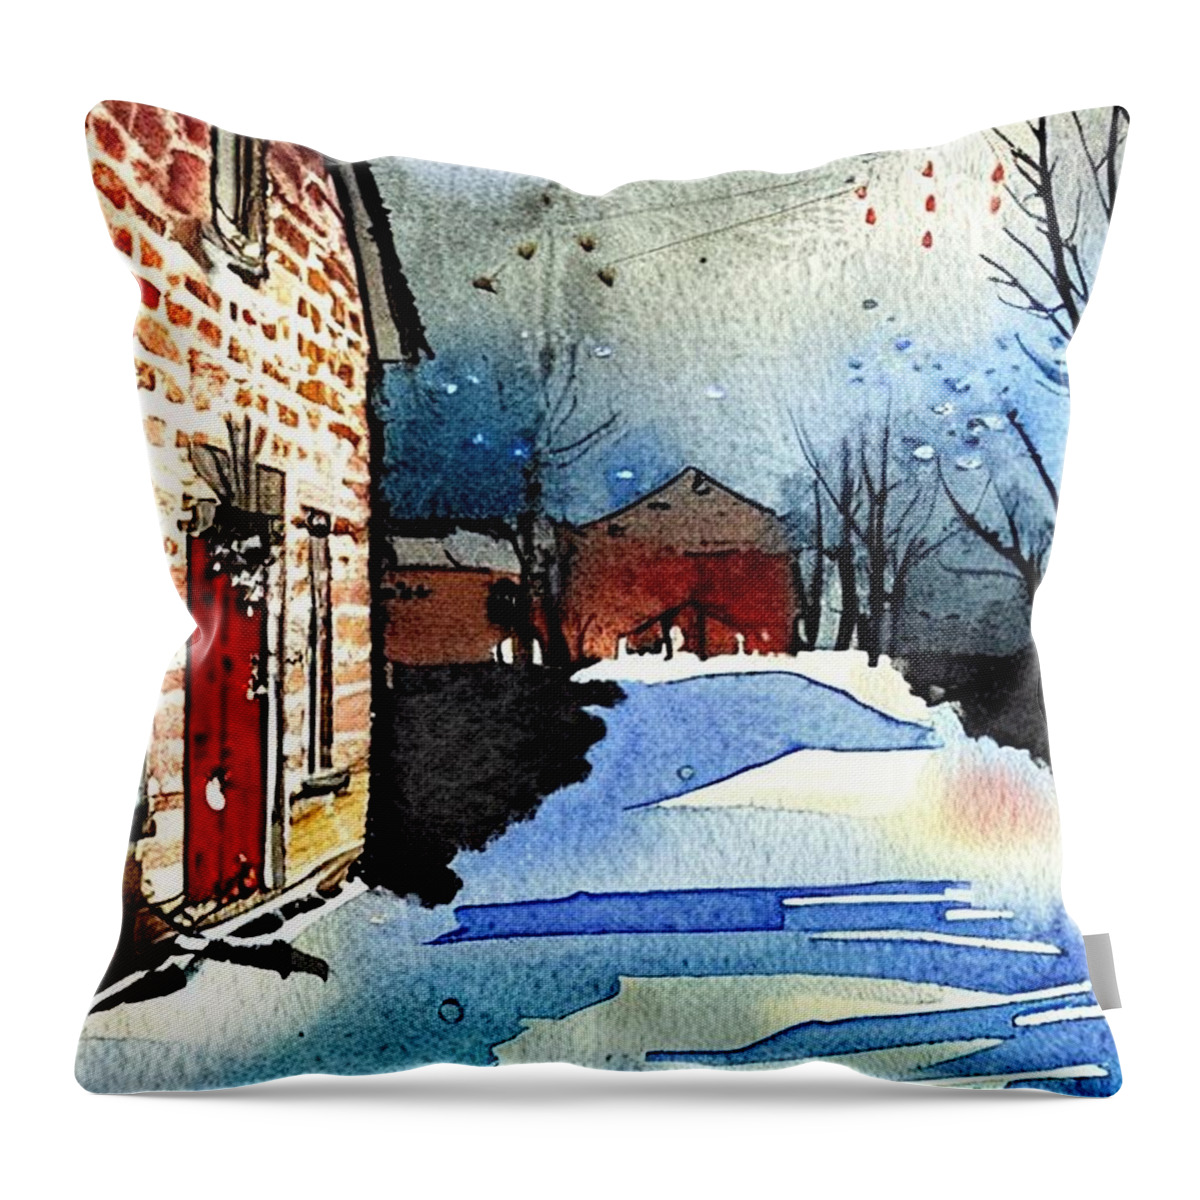 Waterloo Village Throw Pillow featuring the painting Smith's Store Waterloo Village, Morris Canal, In Winter by Christopher Lotito